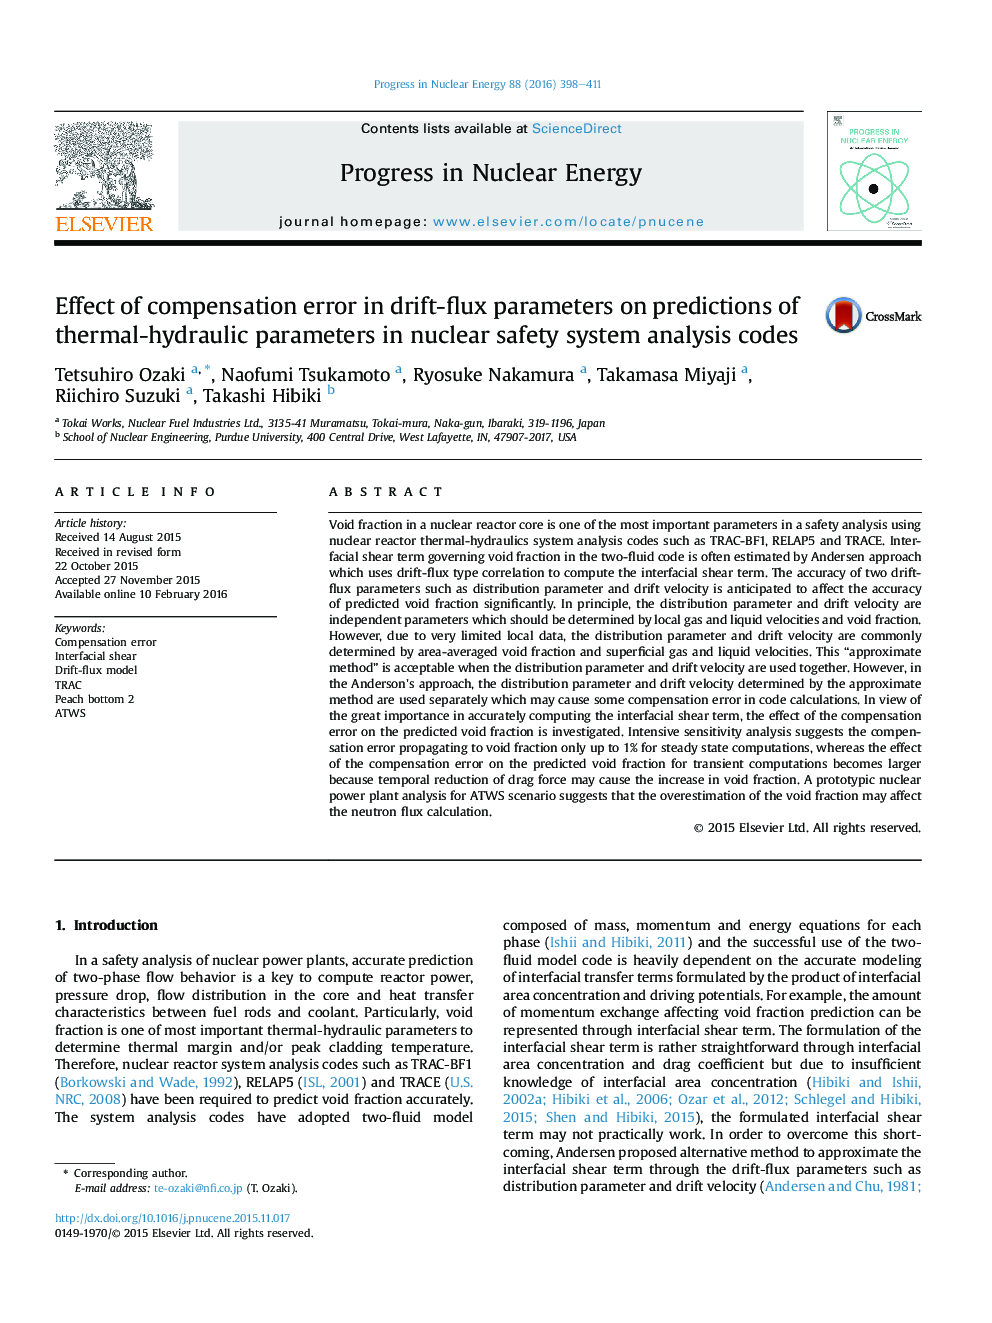 Effect of compensation error in drift-flux parameters on predictions of thermal-hydraulic parameters in nuclear safety system analysis codes